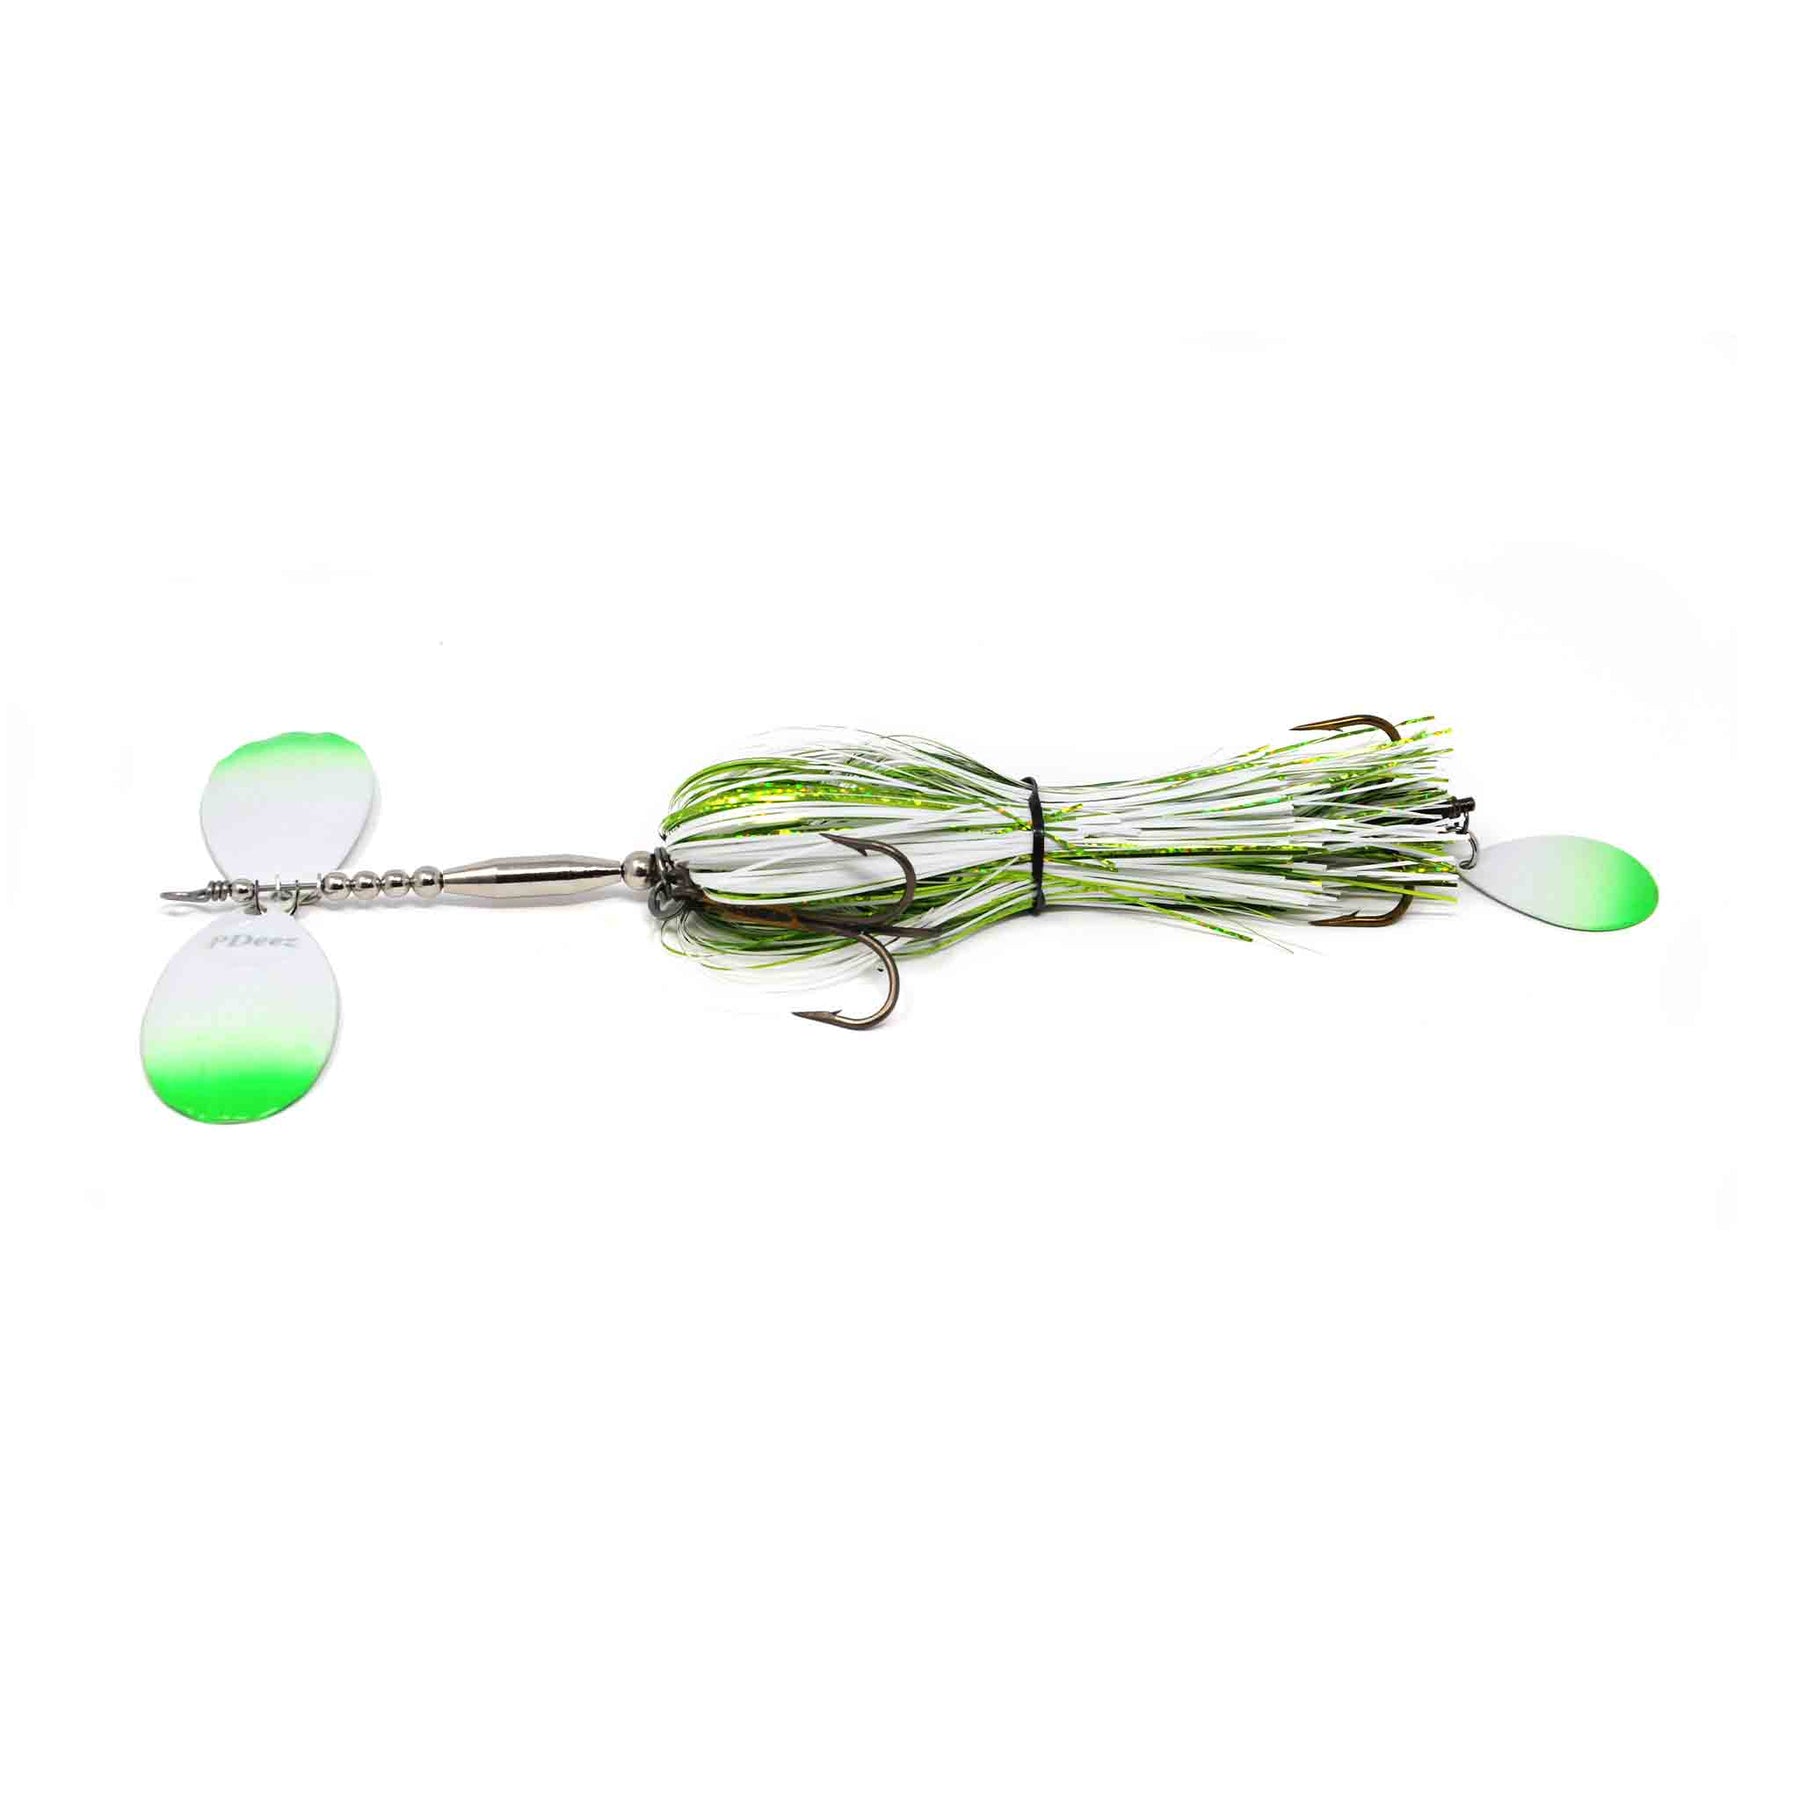 Pdeez KM Attitude Tail Spin (F8/F8) Double Mint Bucktails